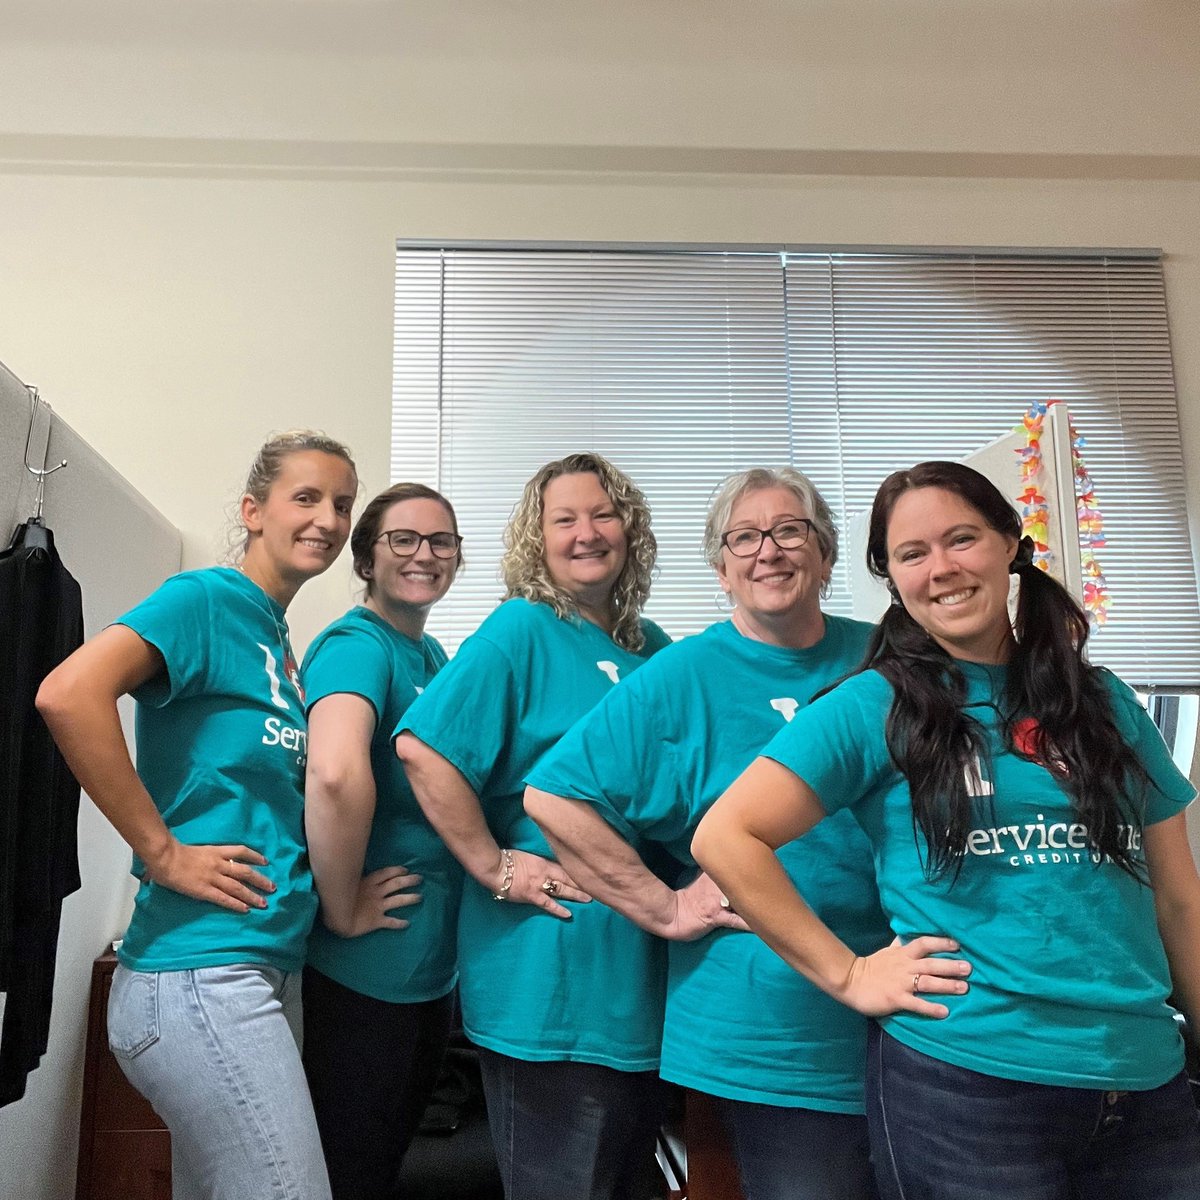 Our Campbell Lane branch Back Office team is celebrating #ILoveMyCreditUnion day! Share or comment and tell us what you love!

#memberfocused #servicedriven #socu #serviceoneCU #creditunion #community #hereforthemember #memberowned #since1963